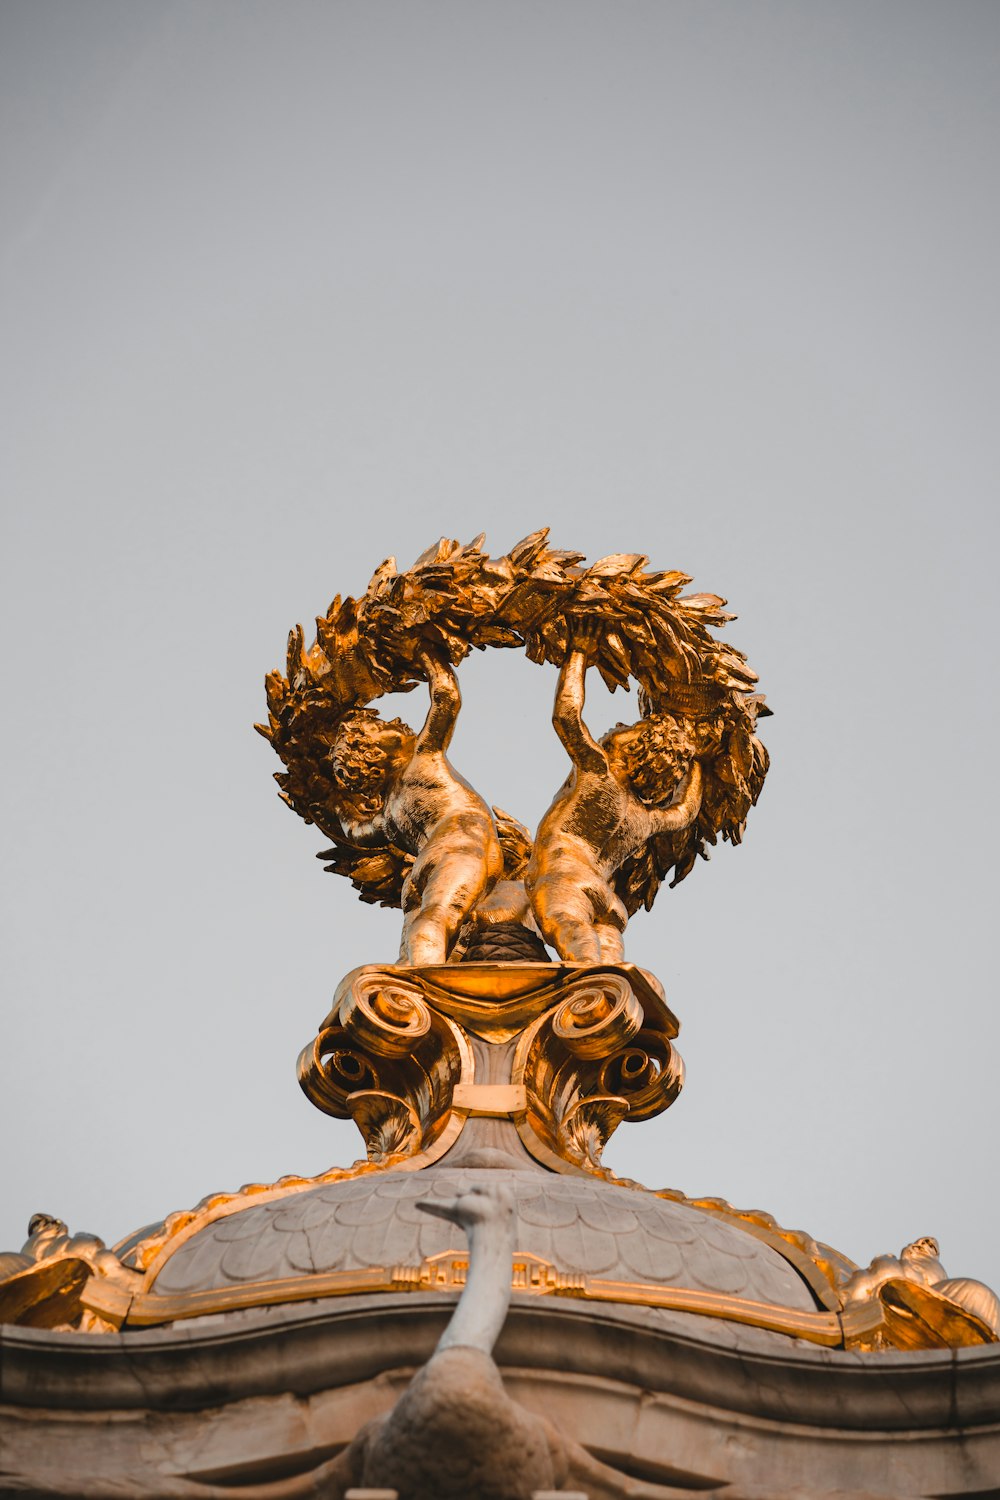 a golden statue on top of a building